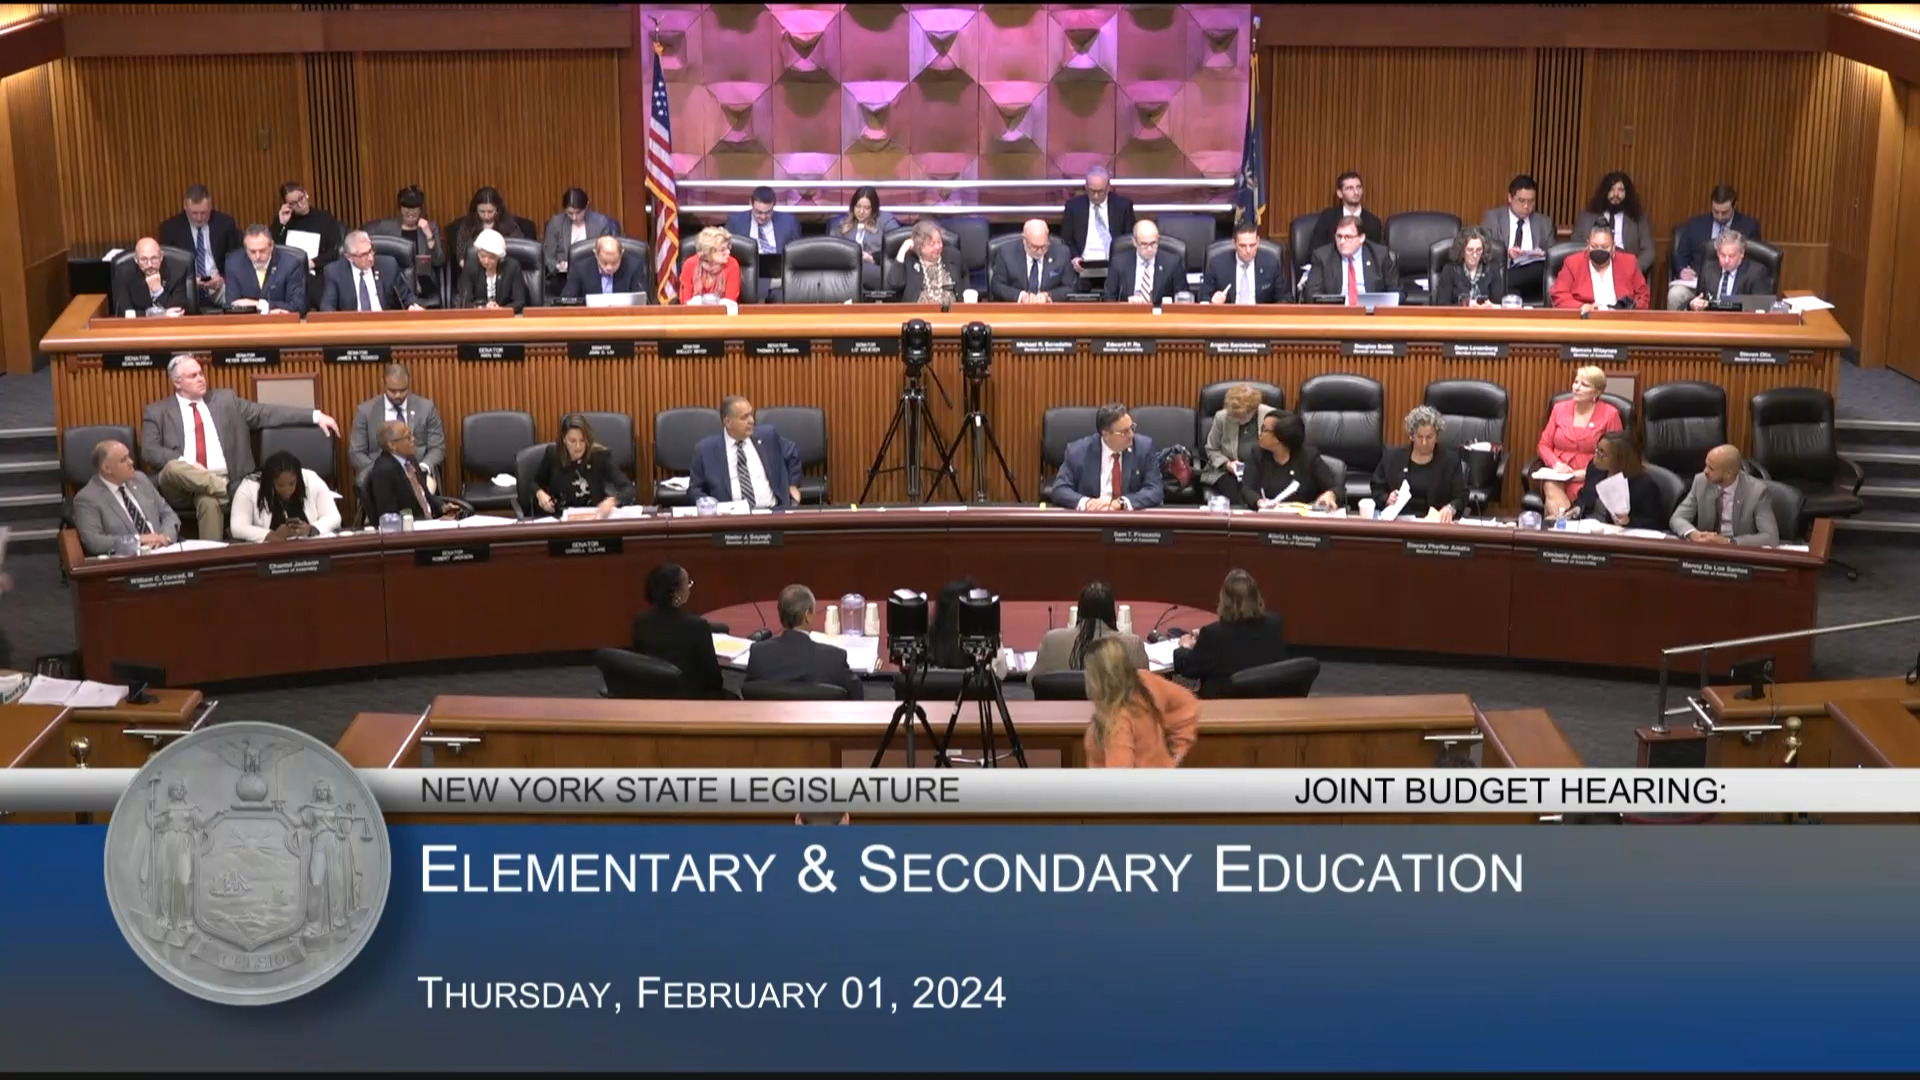 Education Commissioner Testifies During Budget Hearing on Elementary and Secondary Education